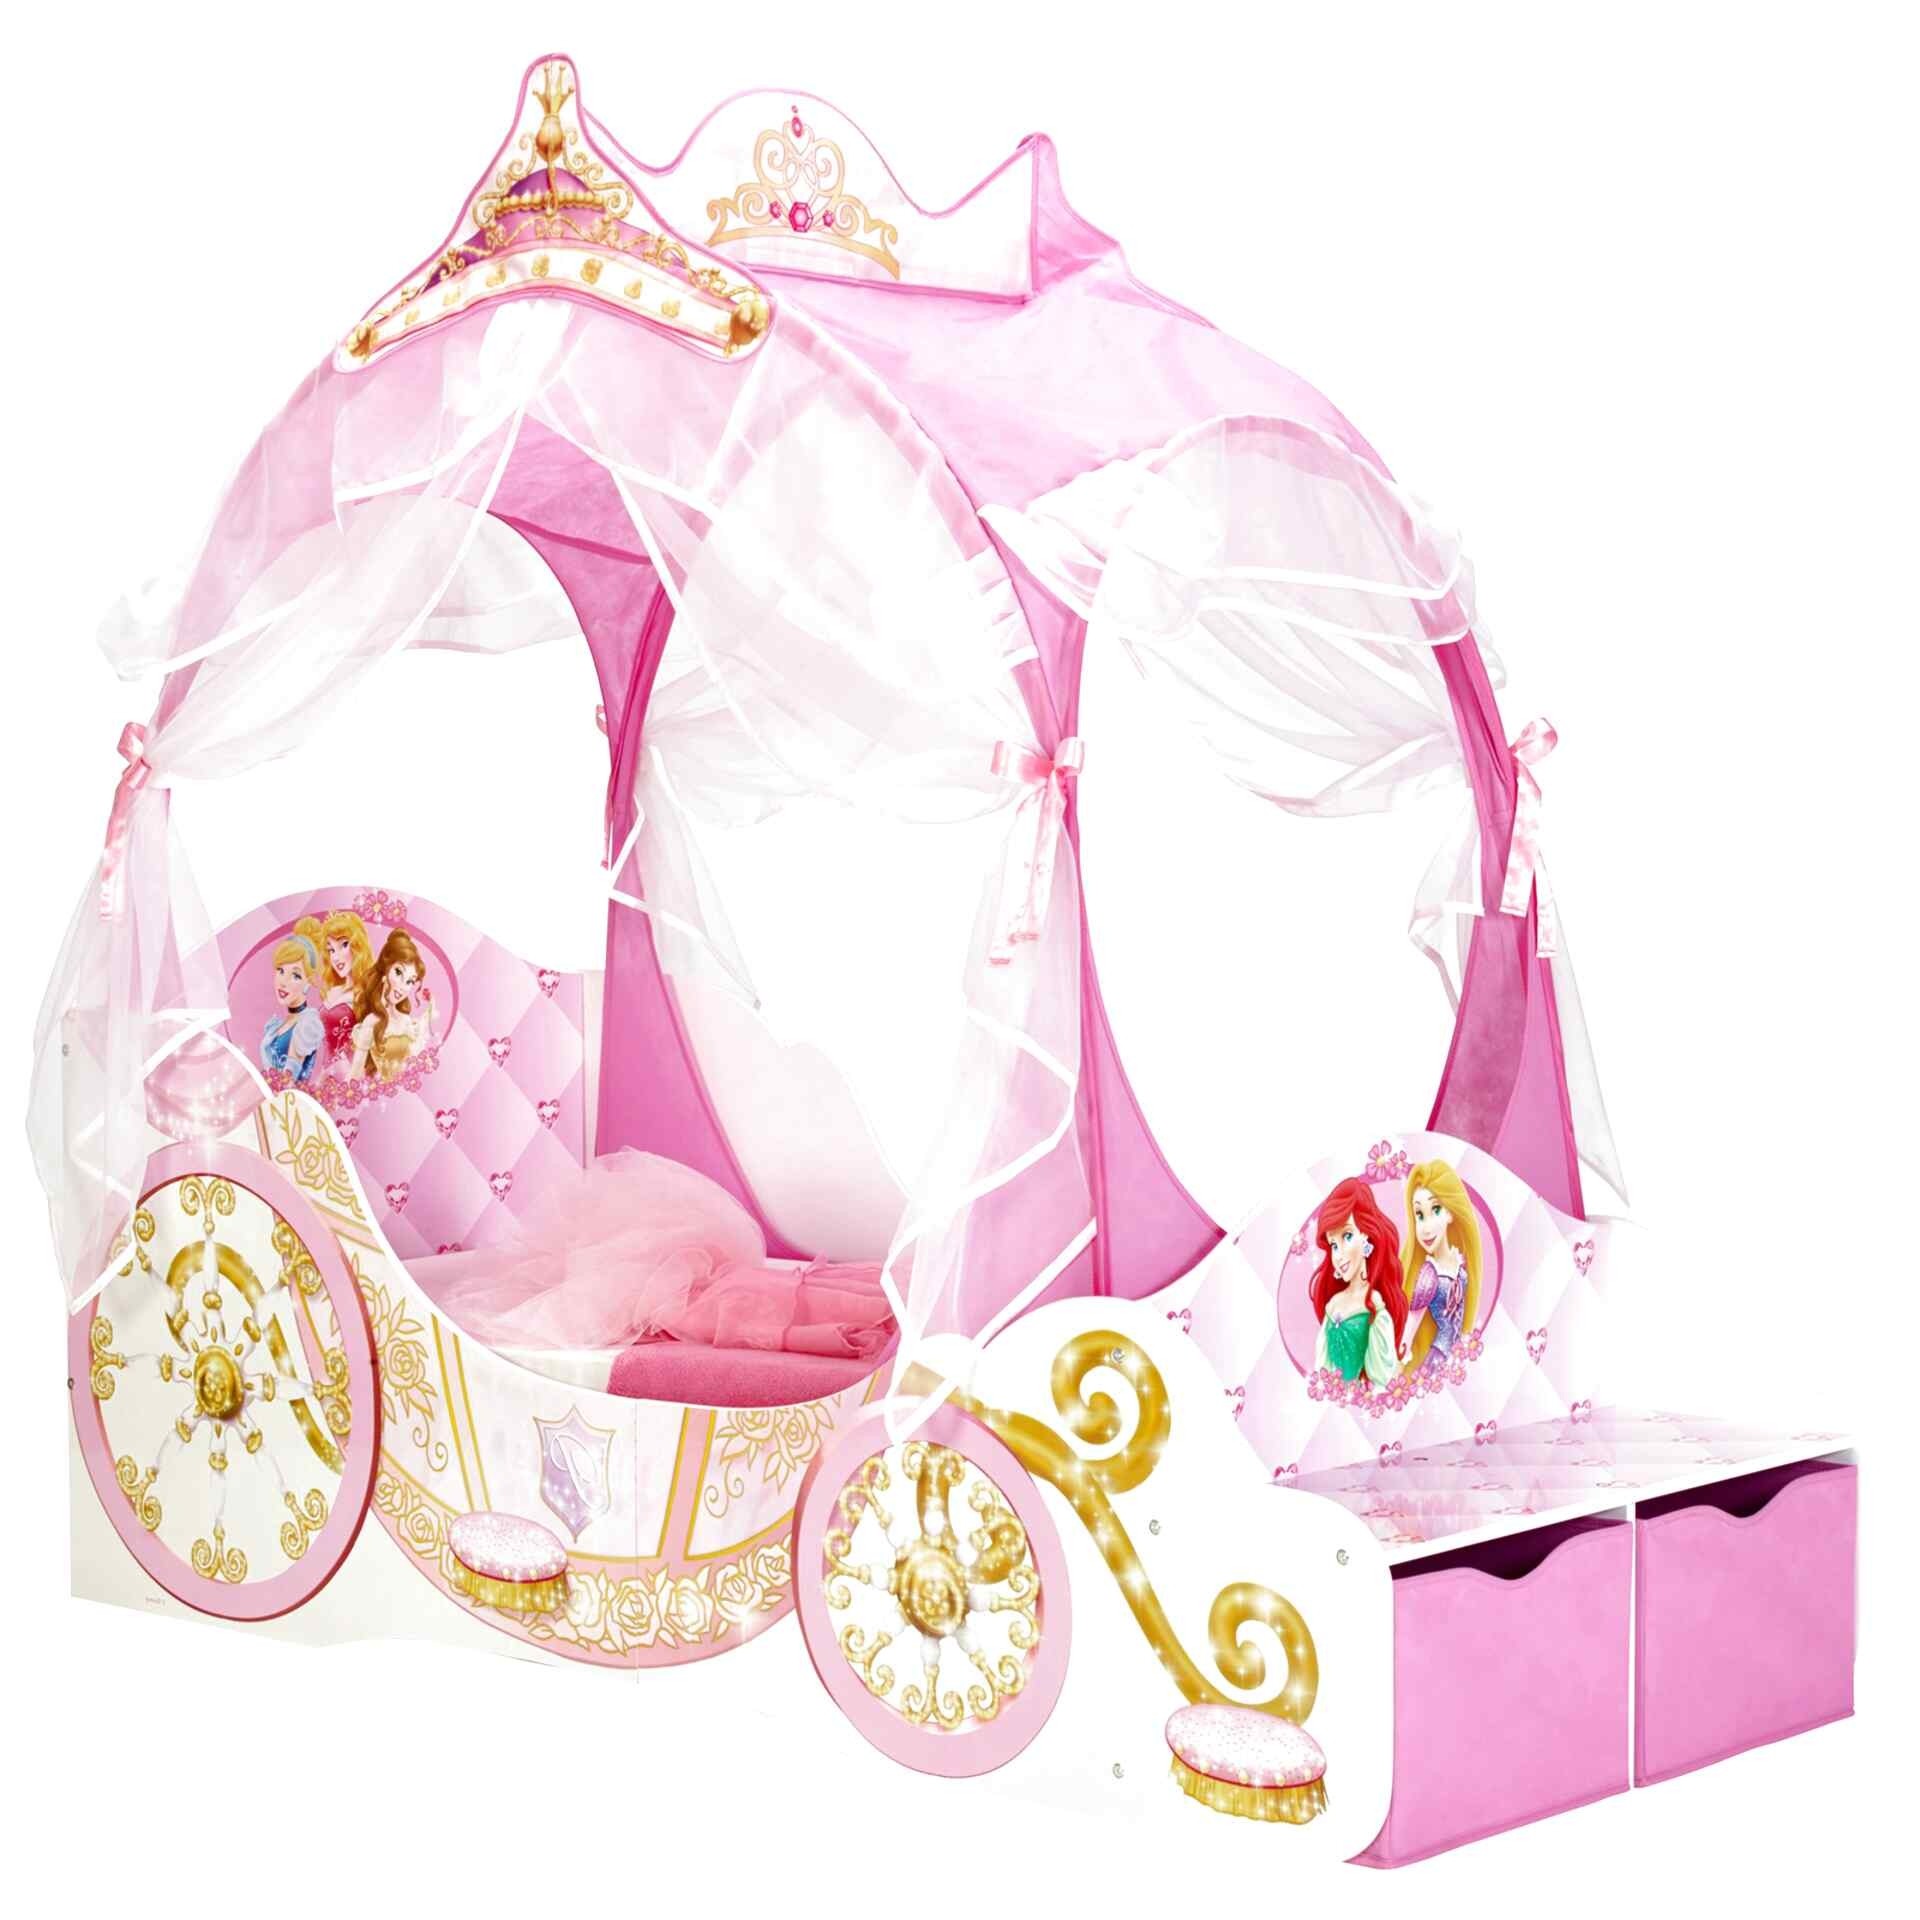 Disney princess carriage bed for sale in uk view 40